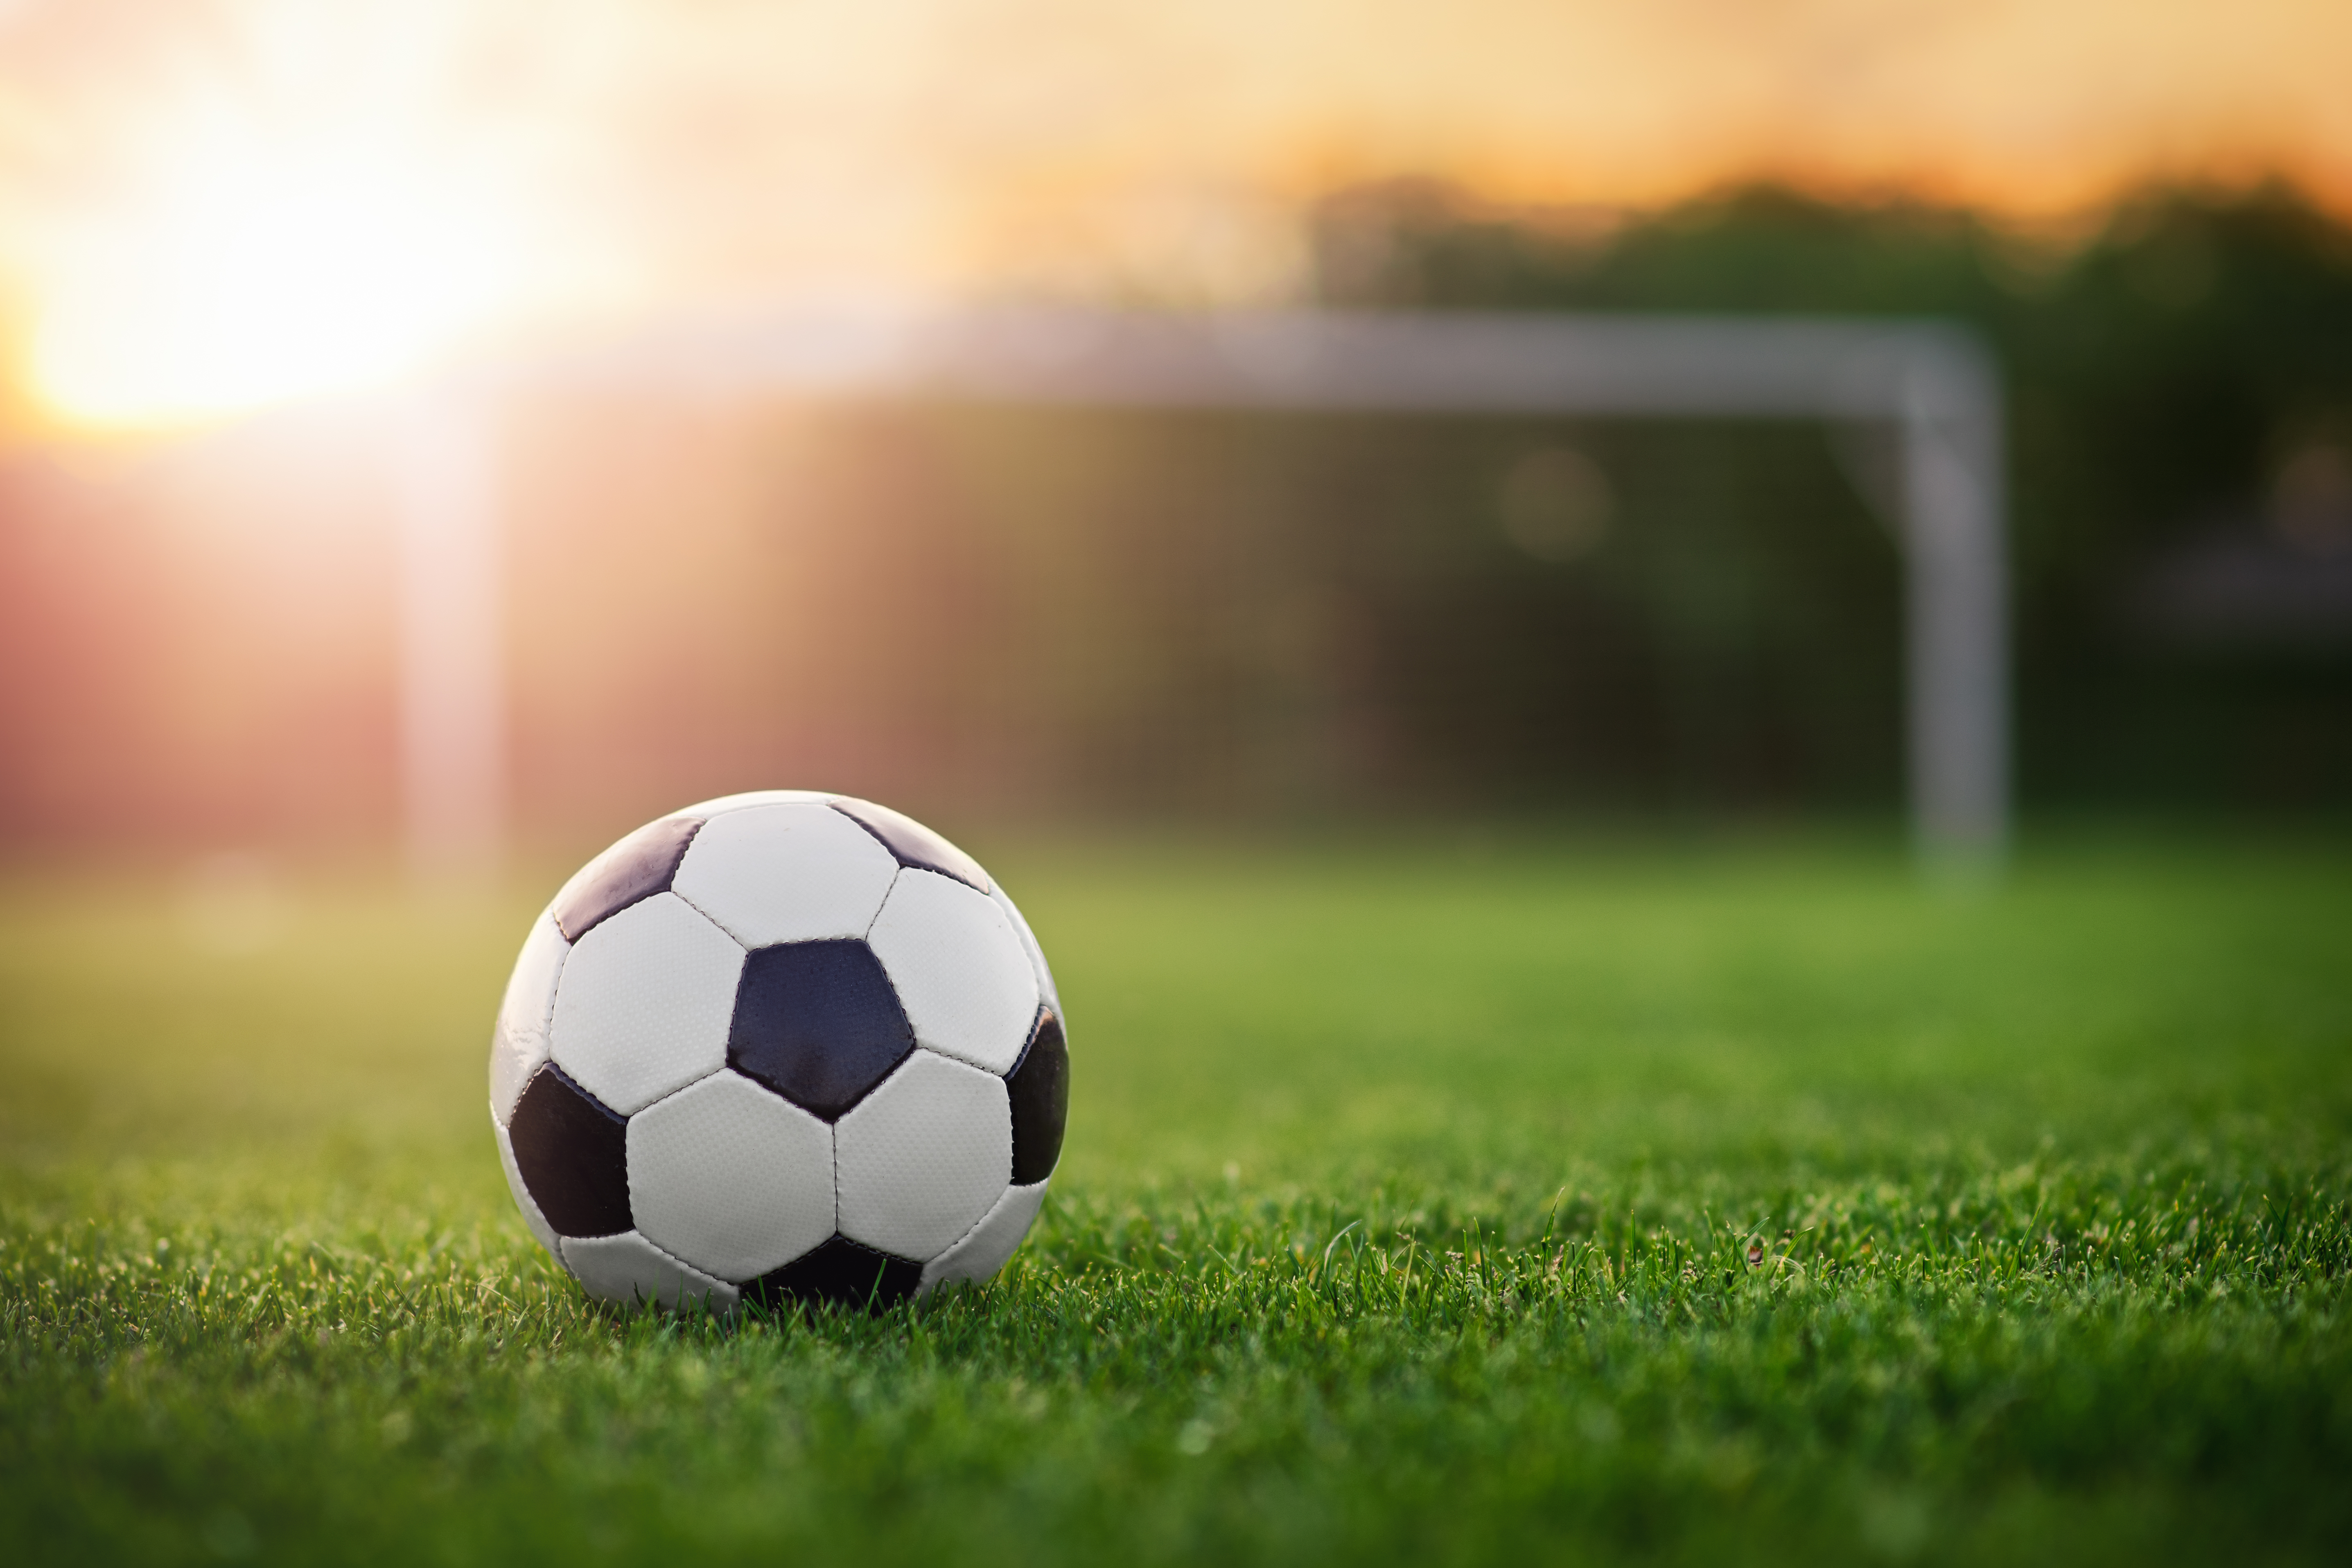 picture of a football on a pitch